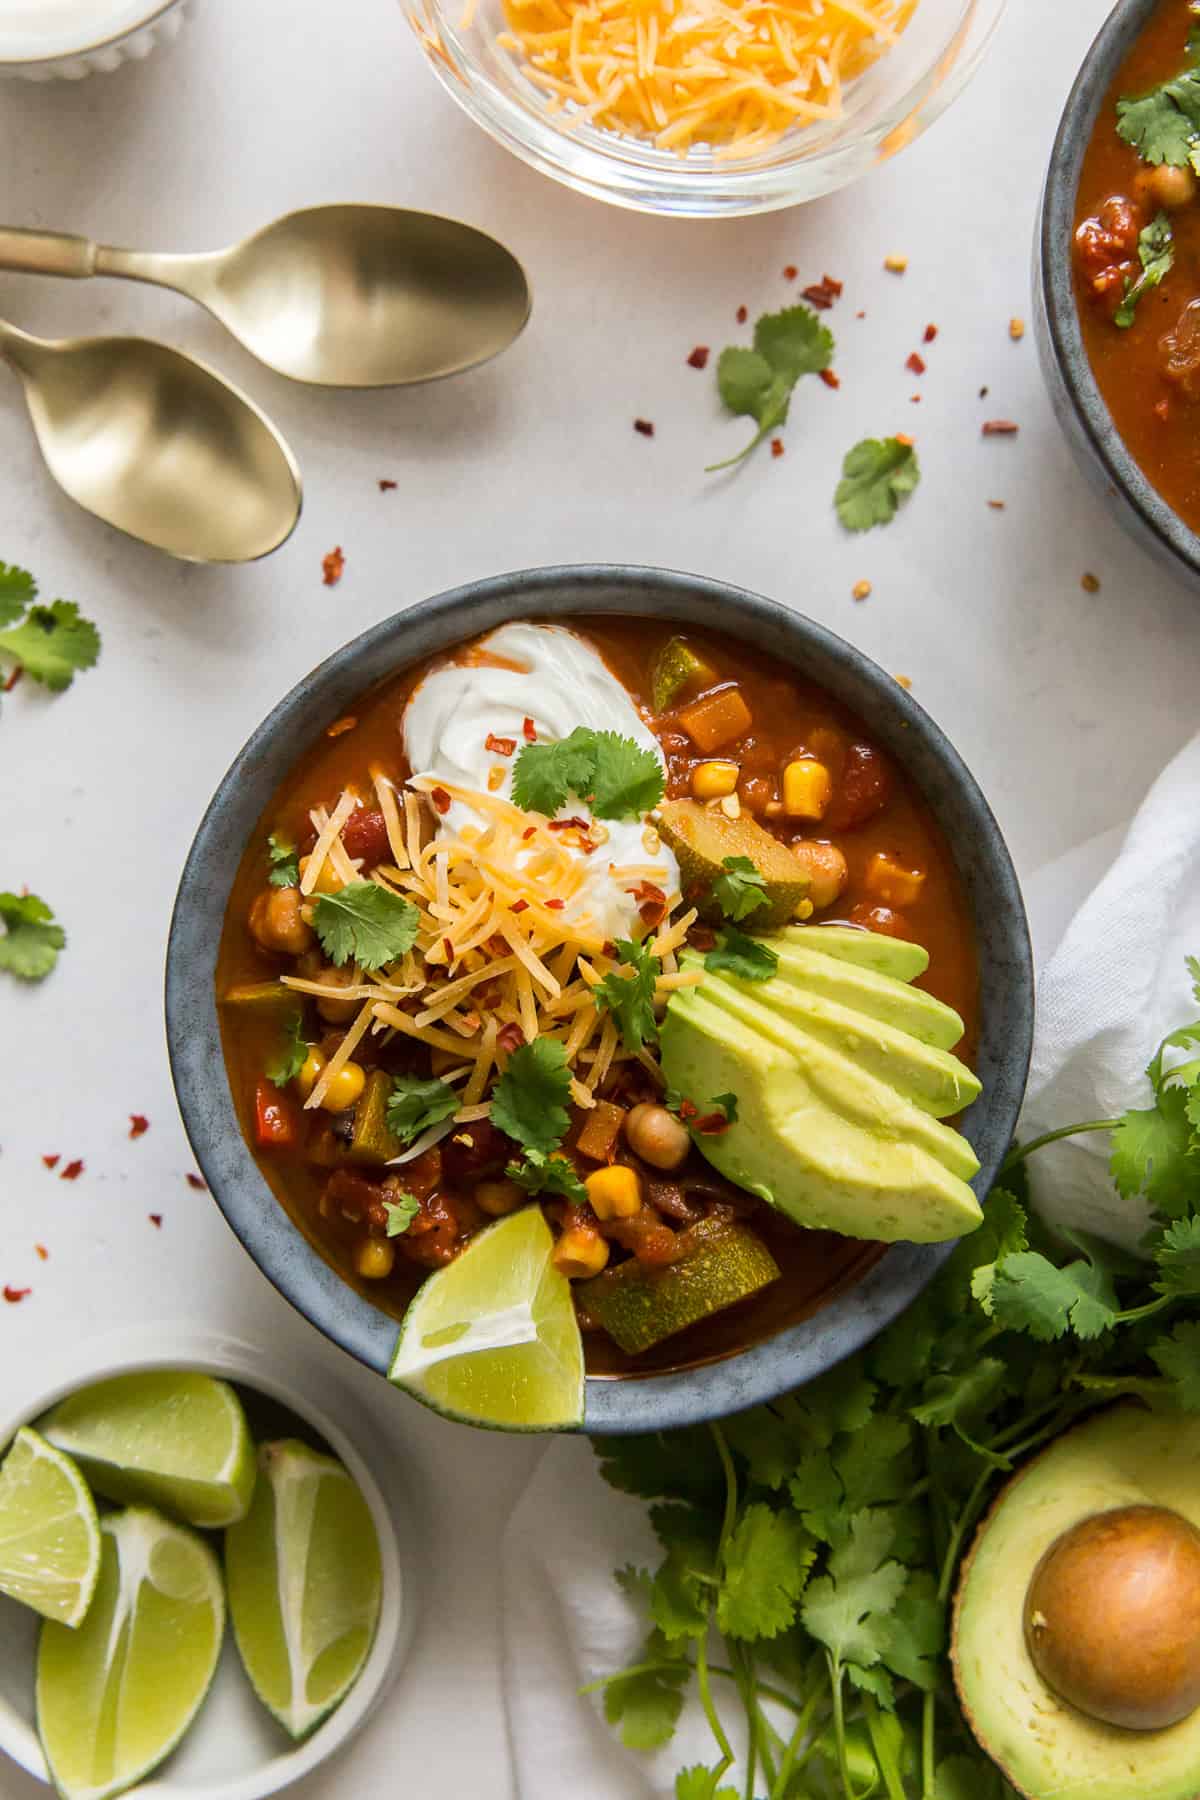 A bowl of chili with slices of lime and spoons nearby.